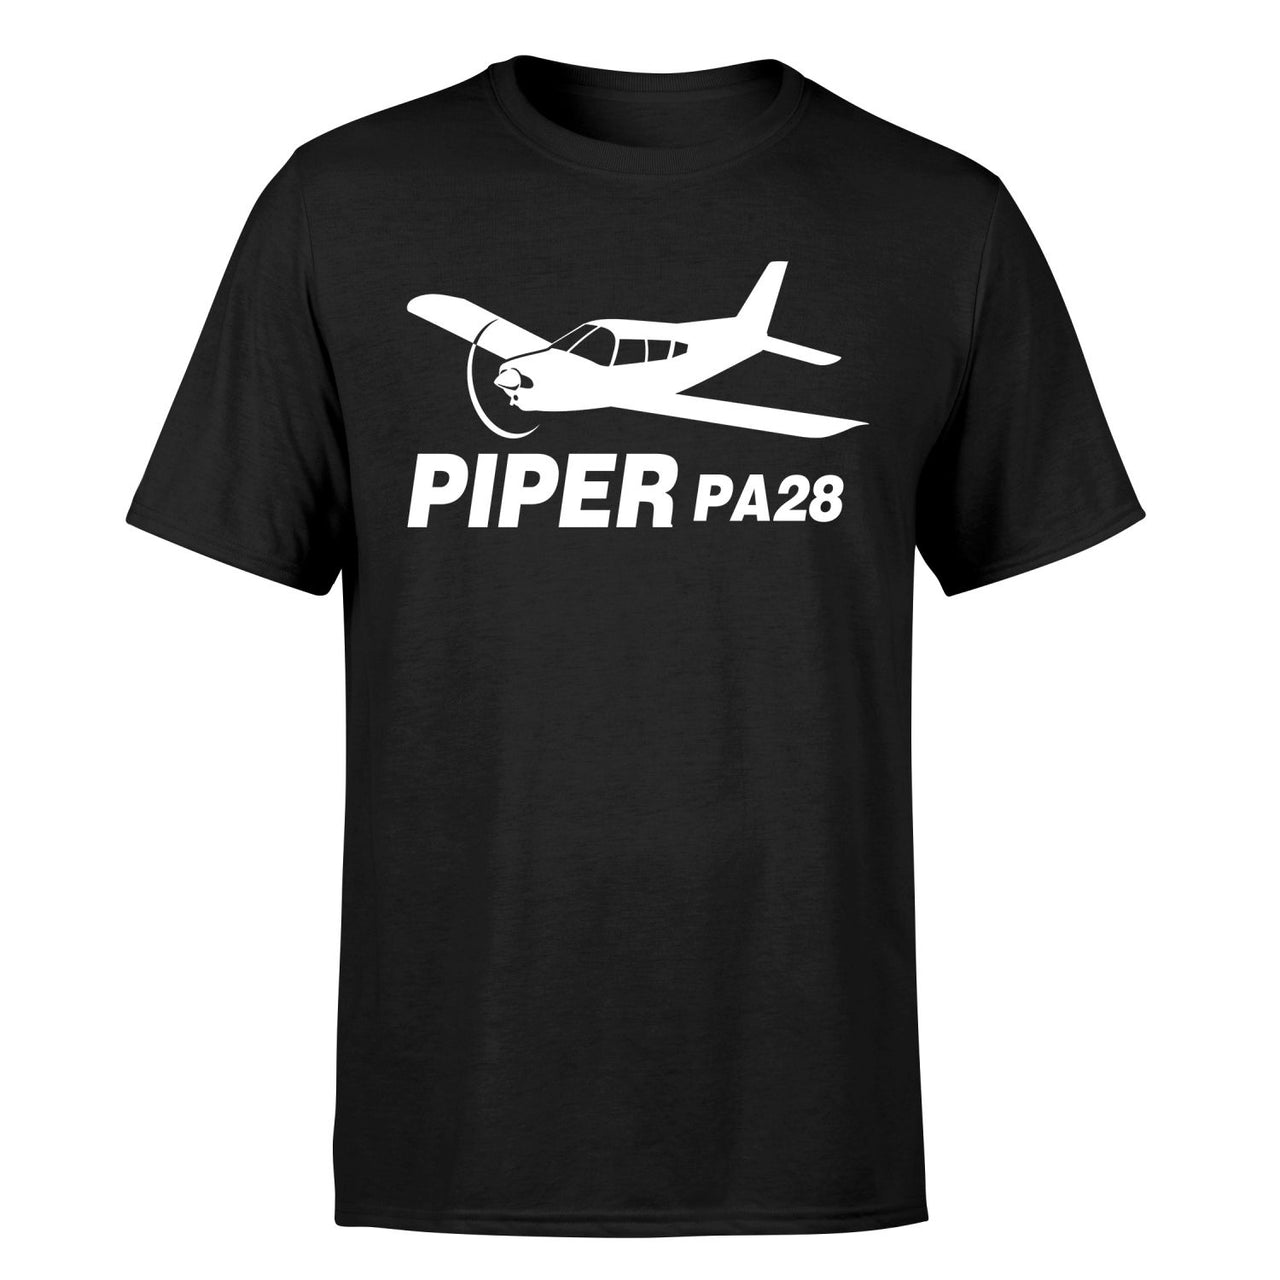 The Piper PA28 Designed T-Shirts